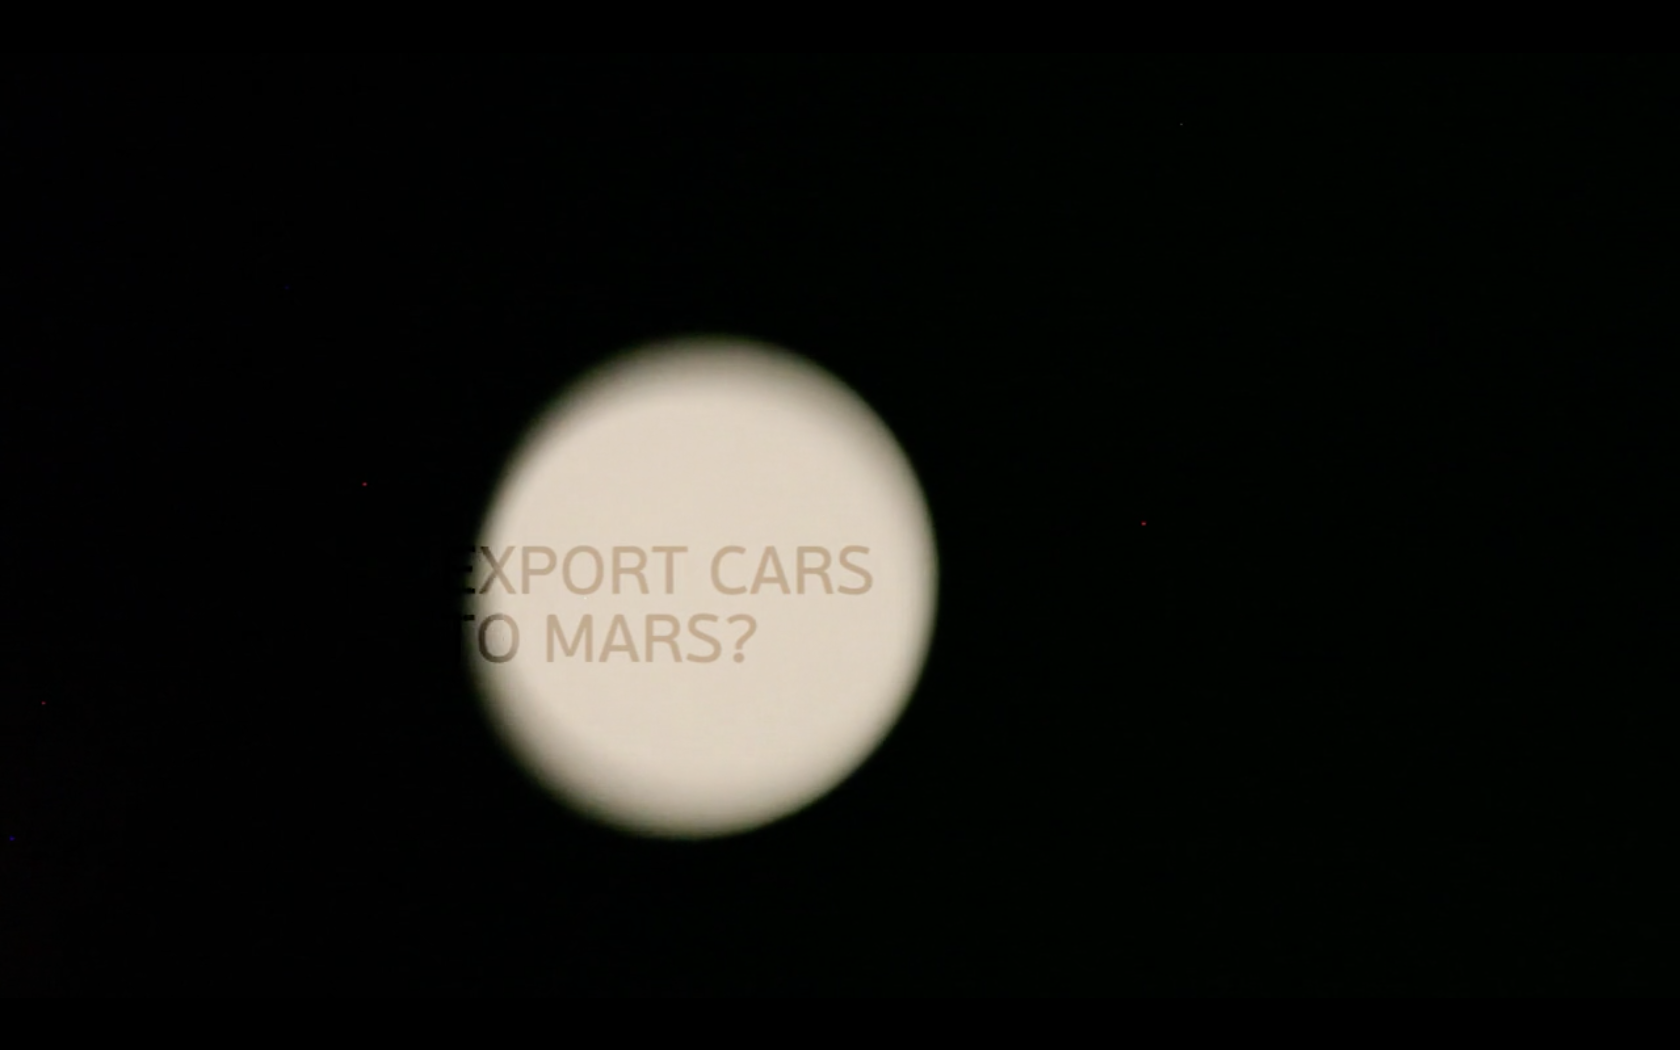 EXPORT CARS TO MARS